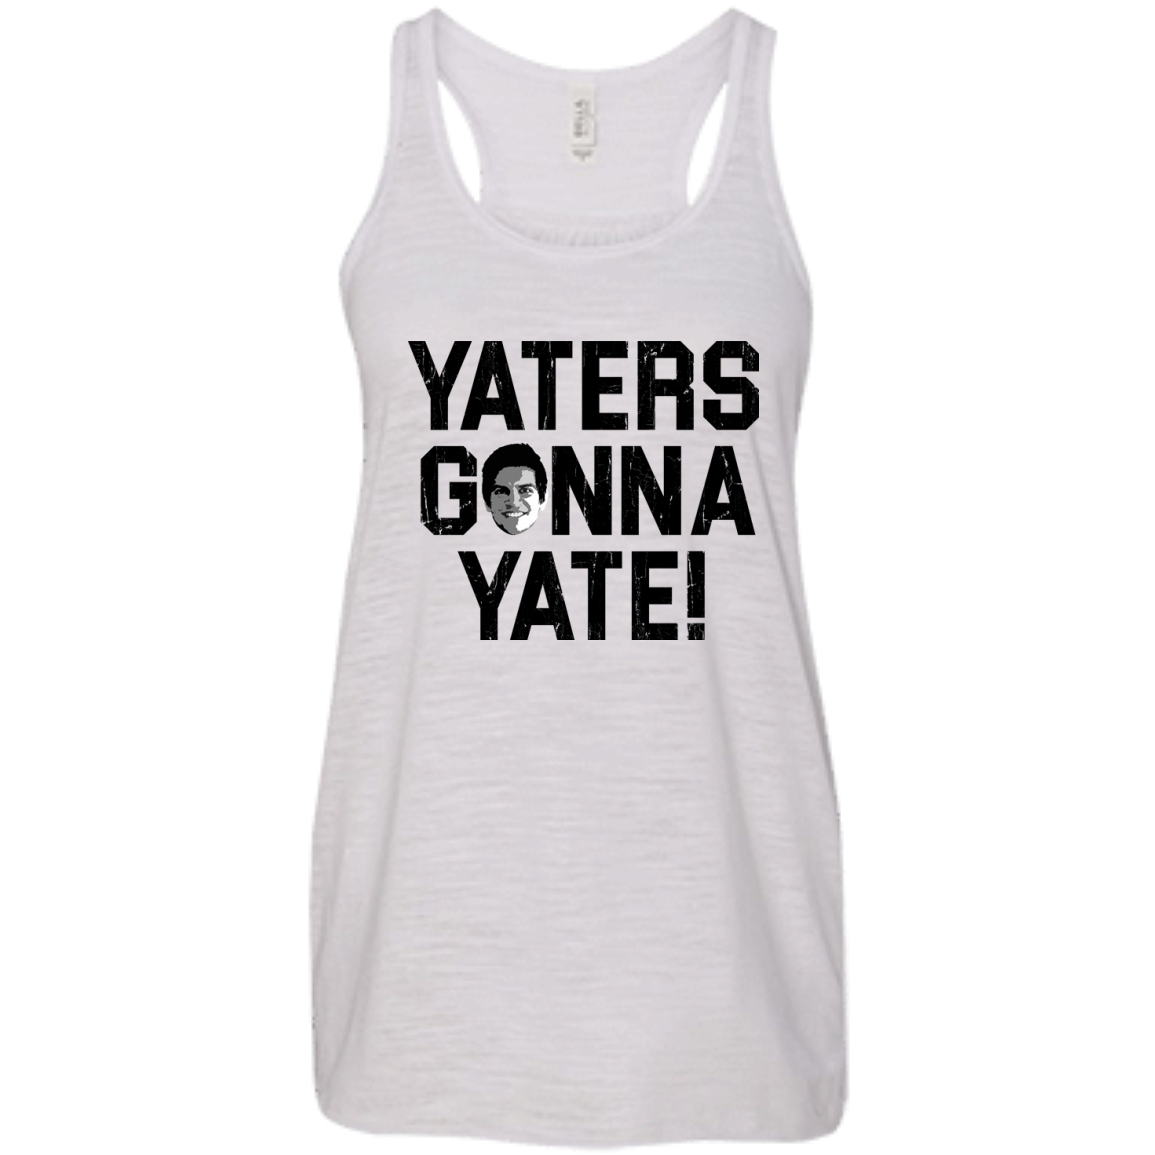 yaters gonna yate meaning